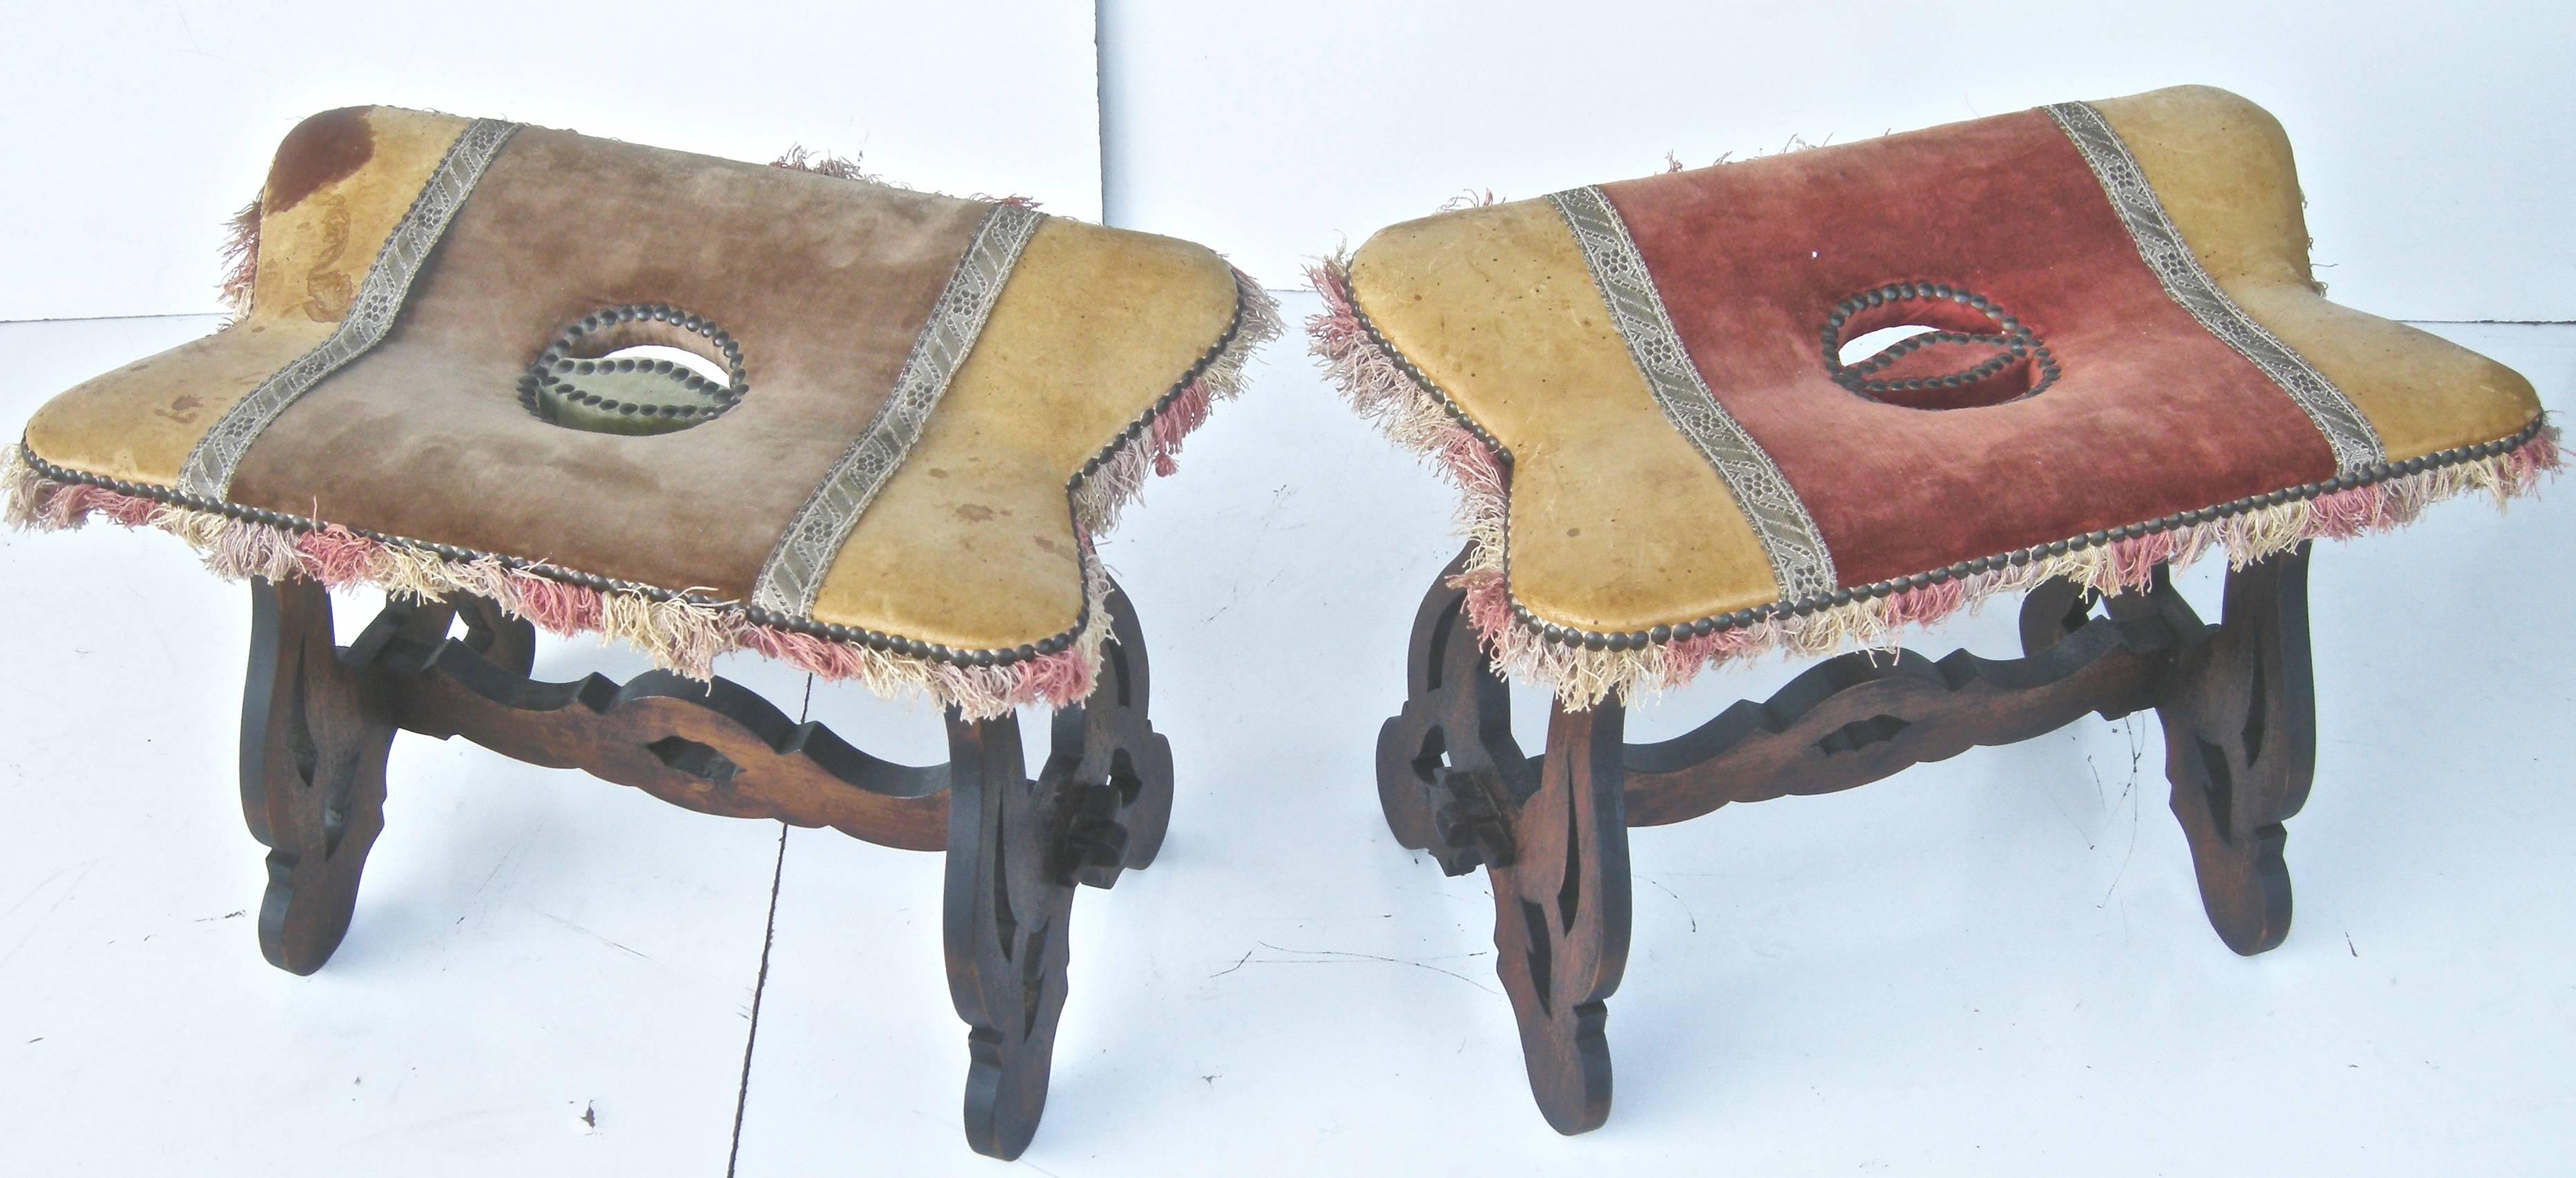 Handsome pair of, vintage, petite, Spanish foot stools, having semi-rustic, continental style and designs. Original leather and fabric combination tops with heavy studding and fringe accents. Warm finishes with some fabric staining and